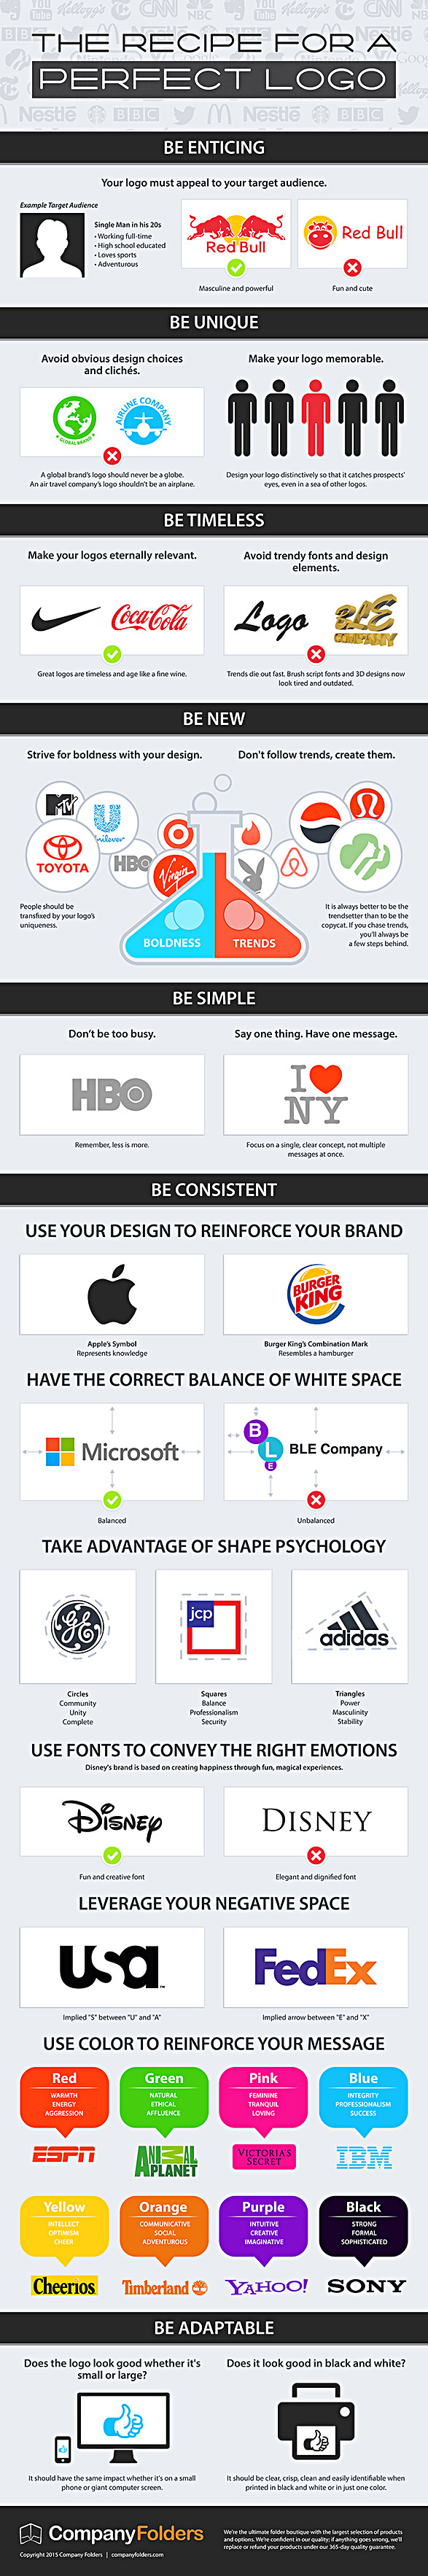 The recipe for a perfect logo (Infographic)